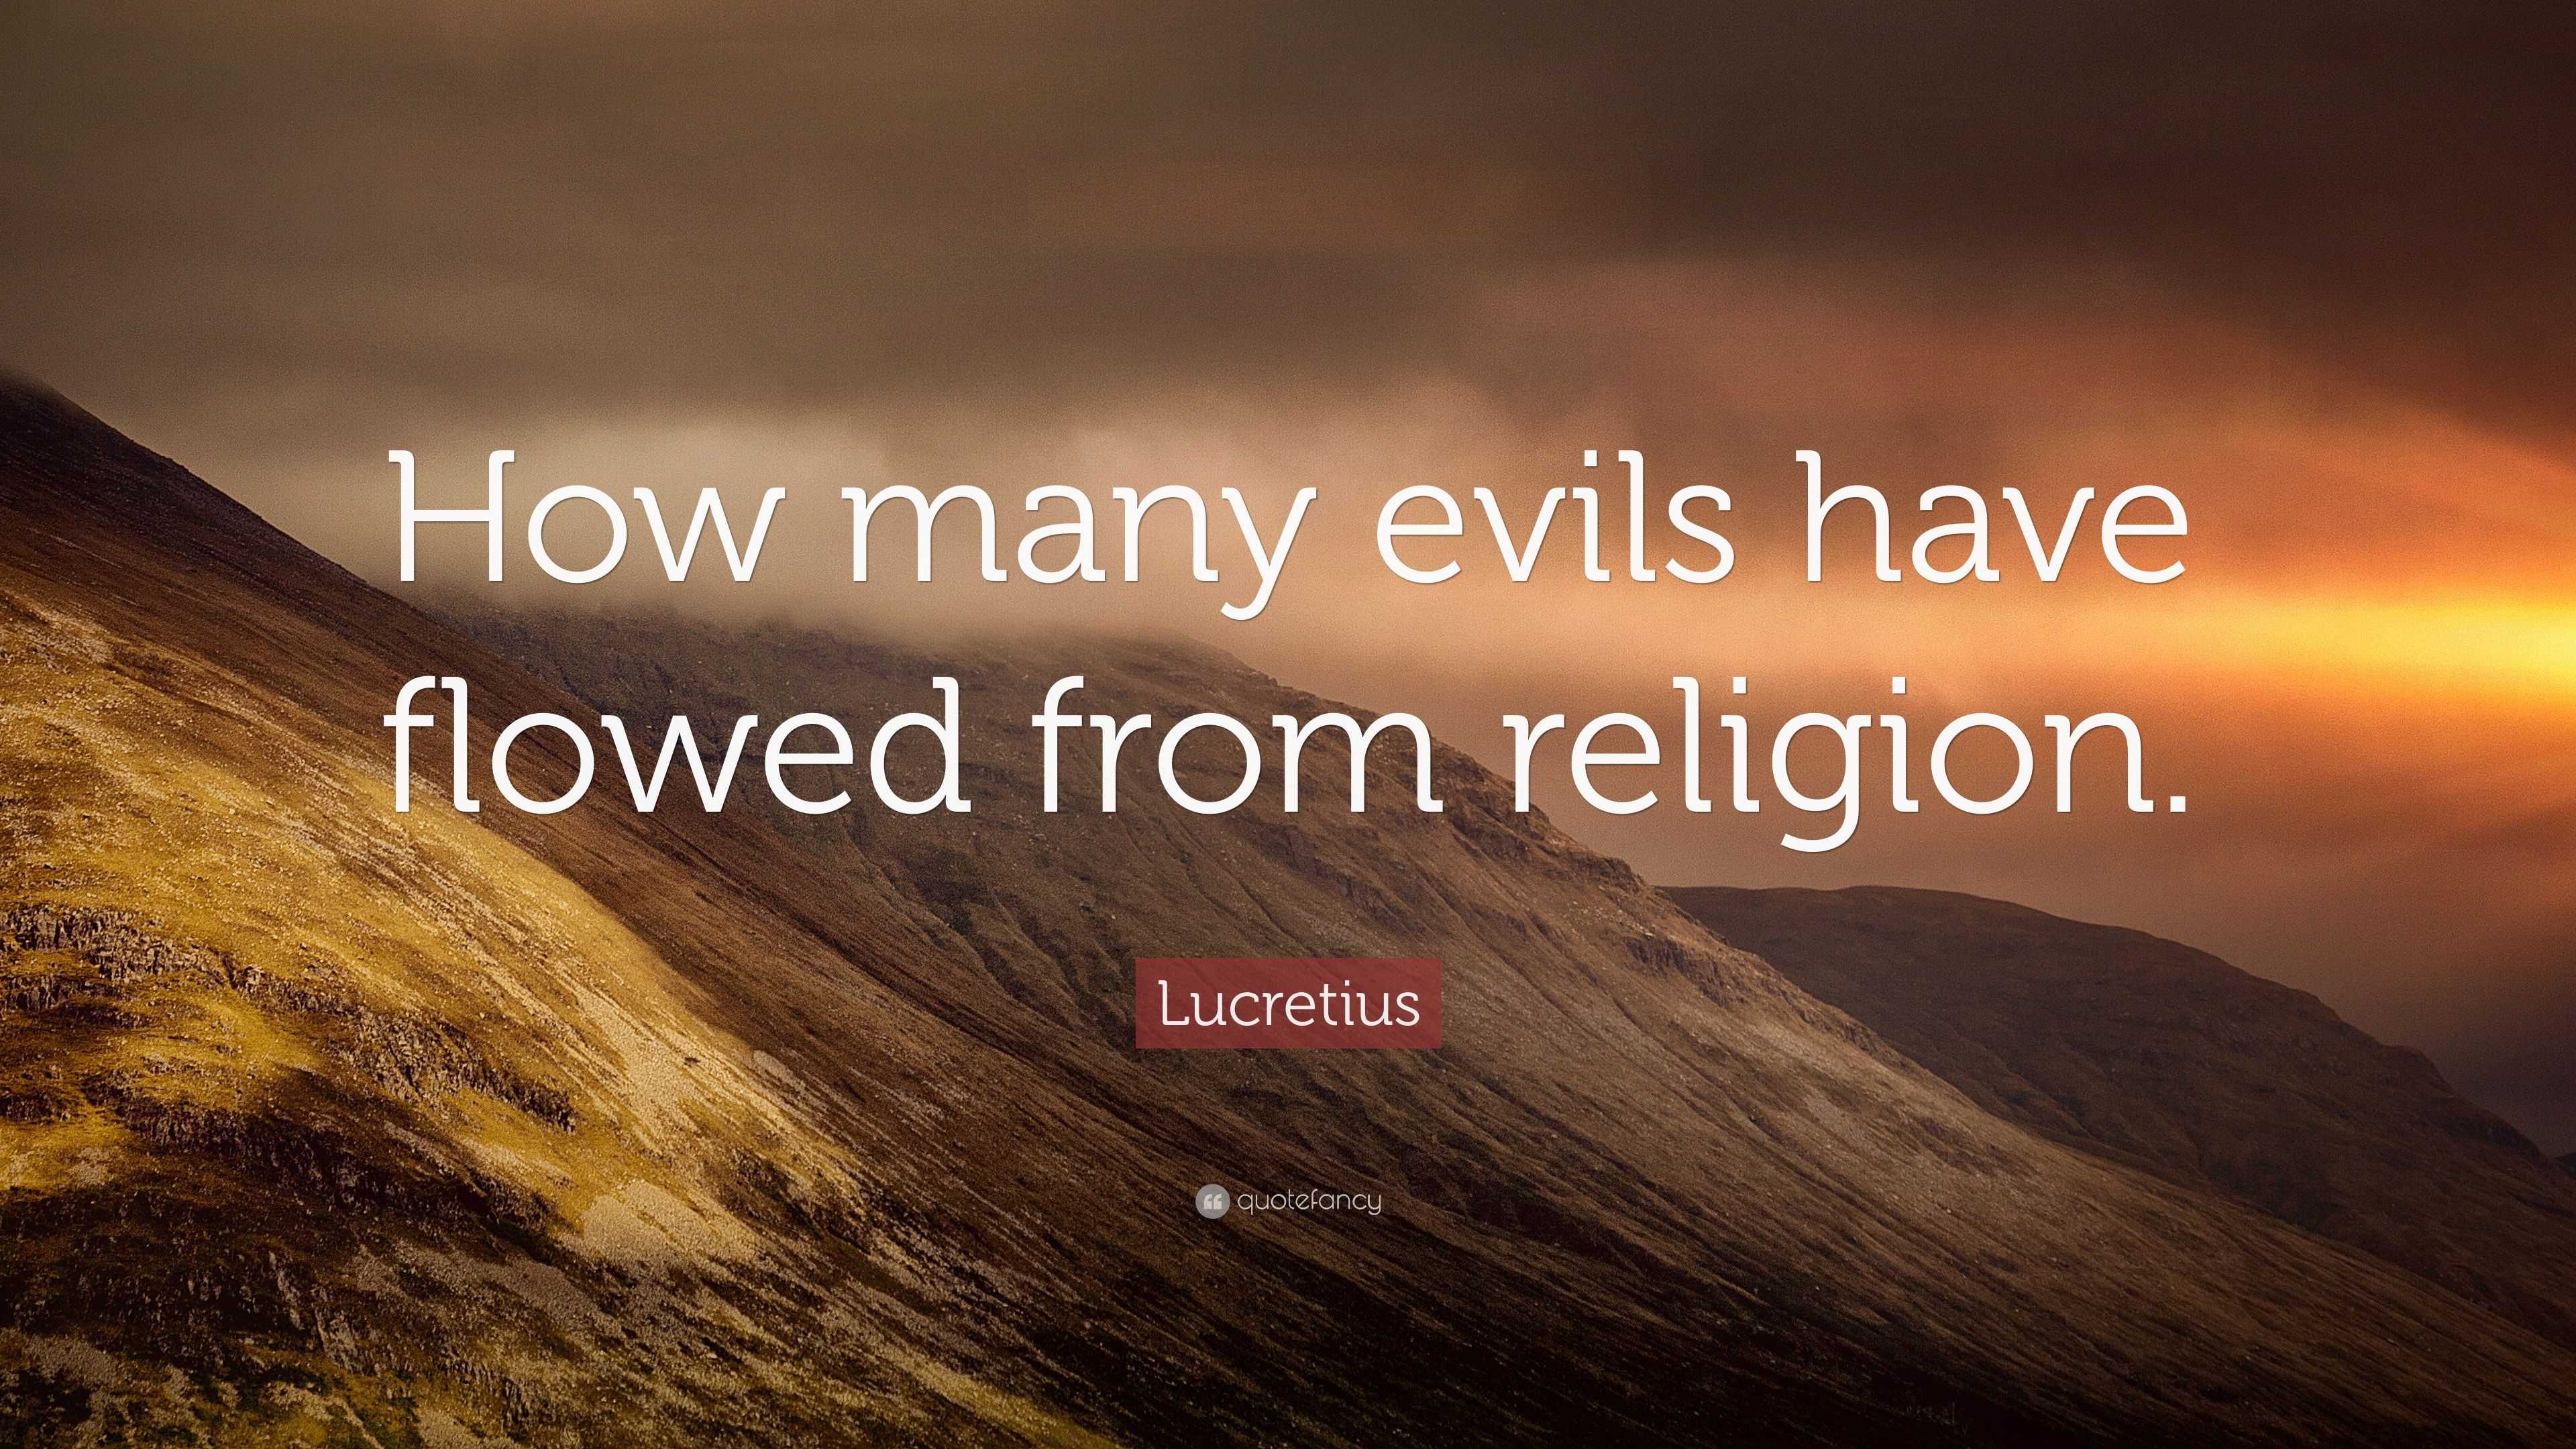 Lucretius Quote: “How many evils have flowed from religion.”